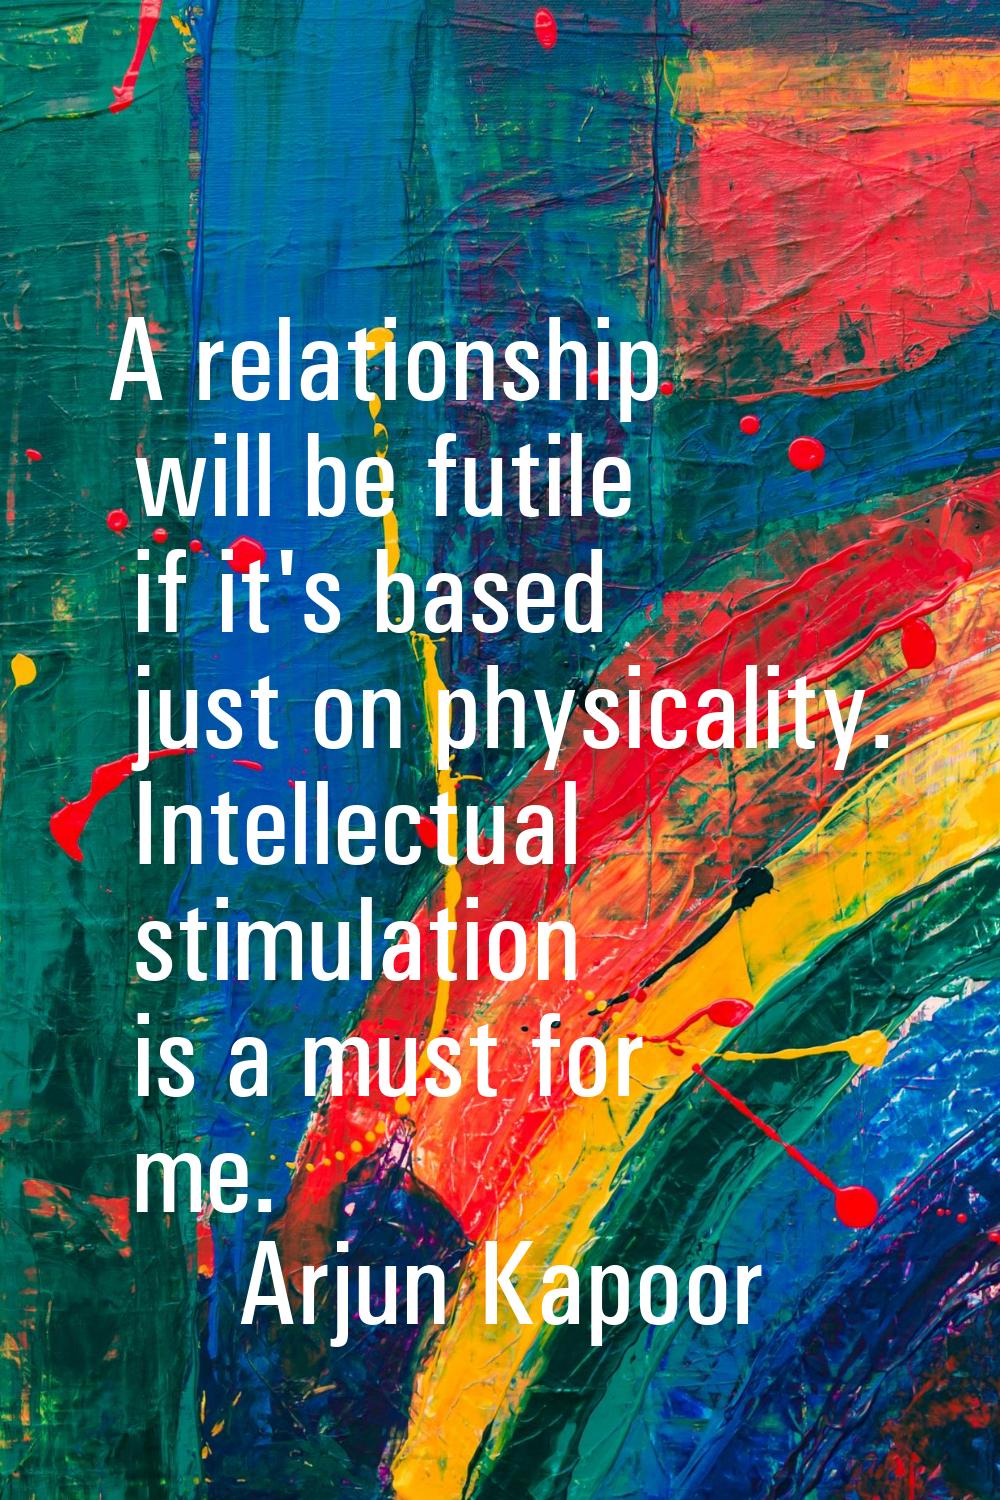 A relationship will be futile if it's based just on physicality. Intellectual stimulation is a must